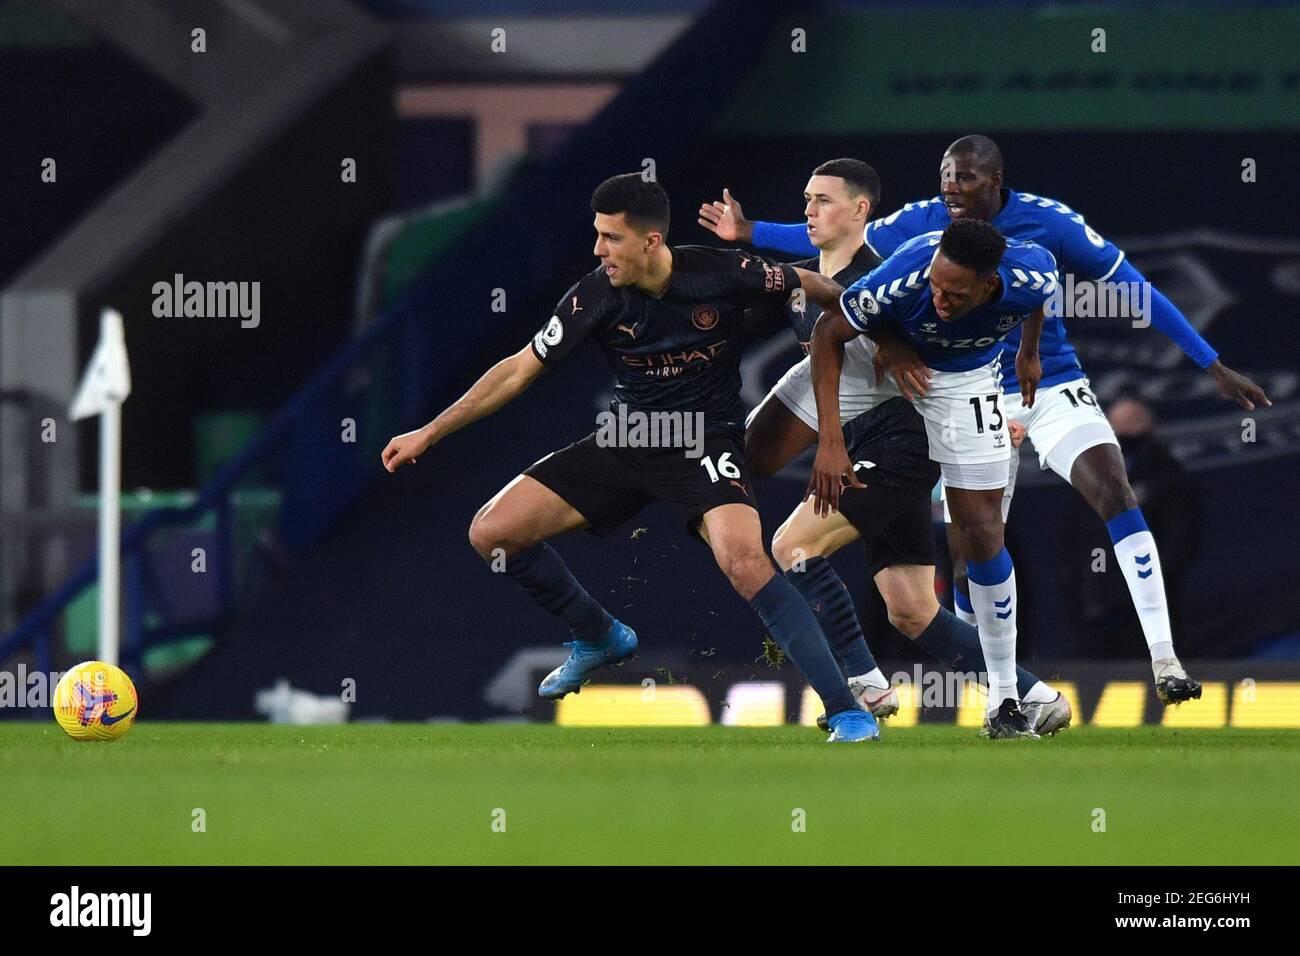 Liverpool, United Kingdom, 17th February 2021. Pictured left to right, Manchester City's Rodri and Manchester City's Phil Foden in action against Everton’s Yerry Mina and Everton’s Abdoulaye Doucoure. Credit: Anthony Devlin/Alamy Live News Stock Photo